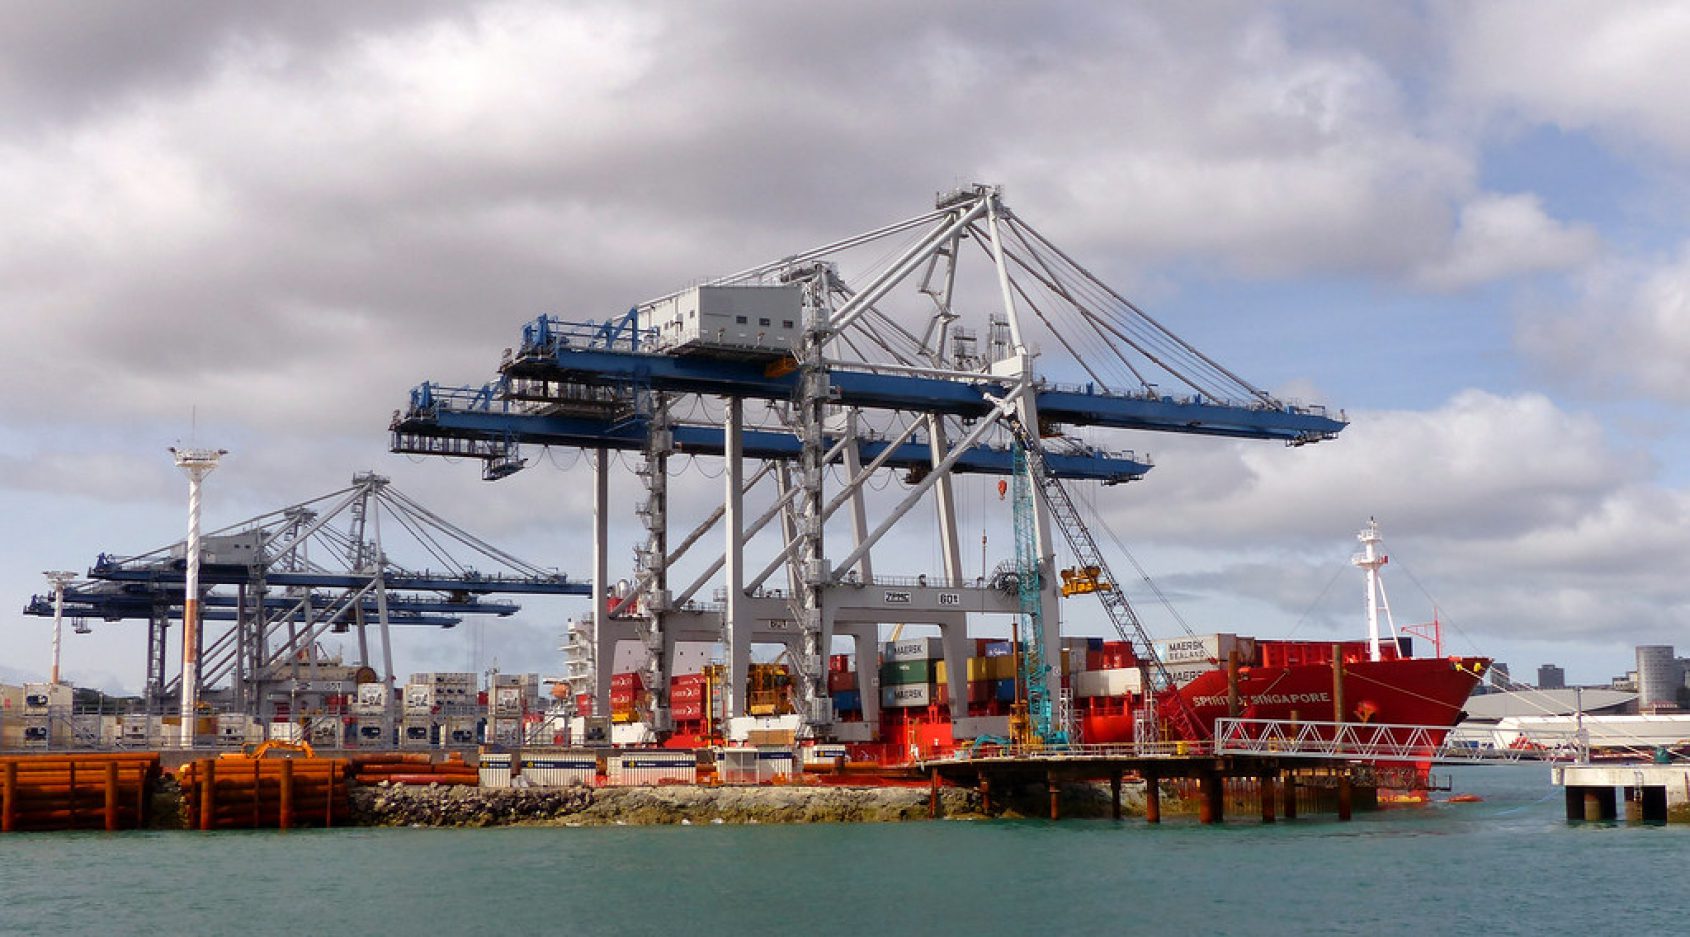 Union Calls for Inquiry After Stevedore Falls to Death at New Zealand’s Auckland Port